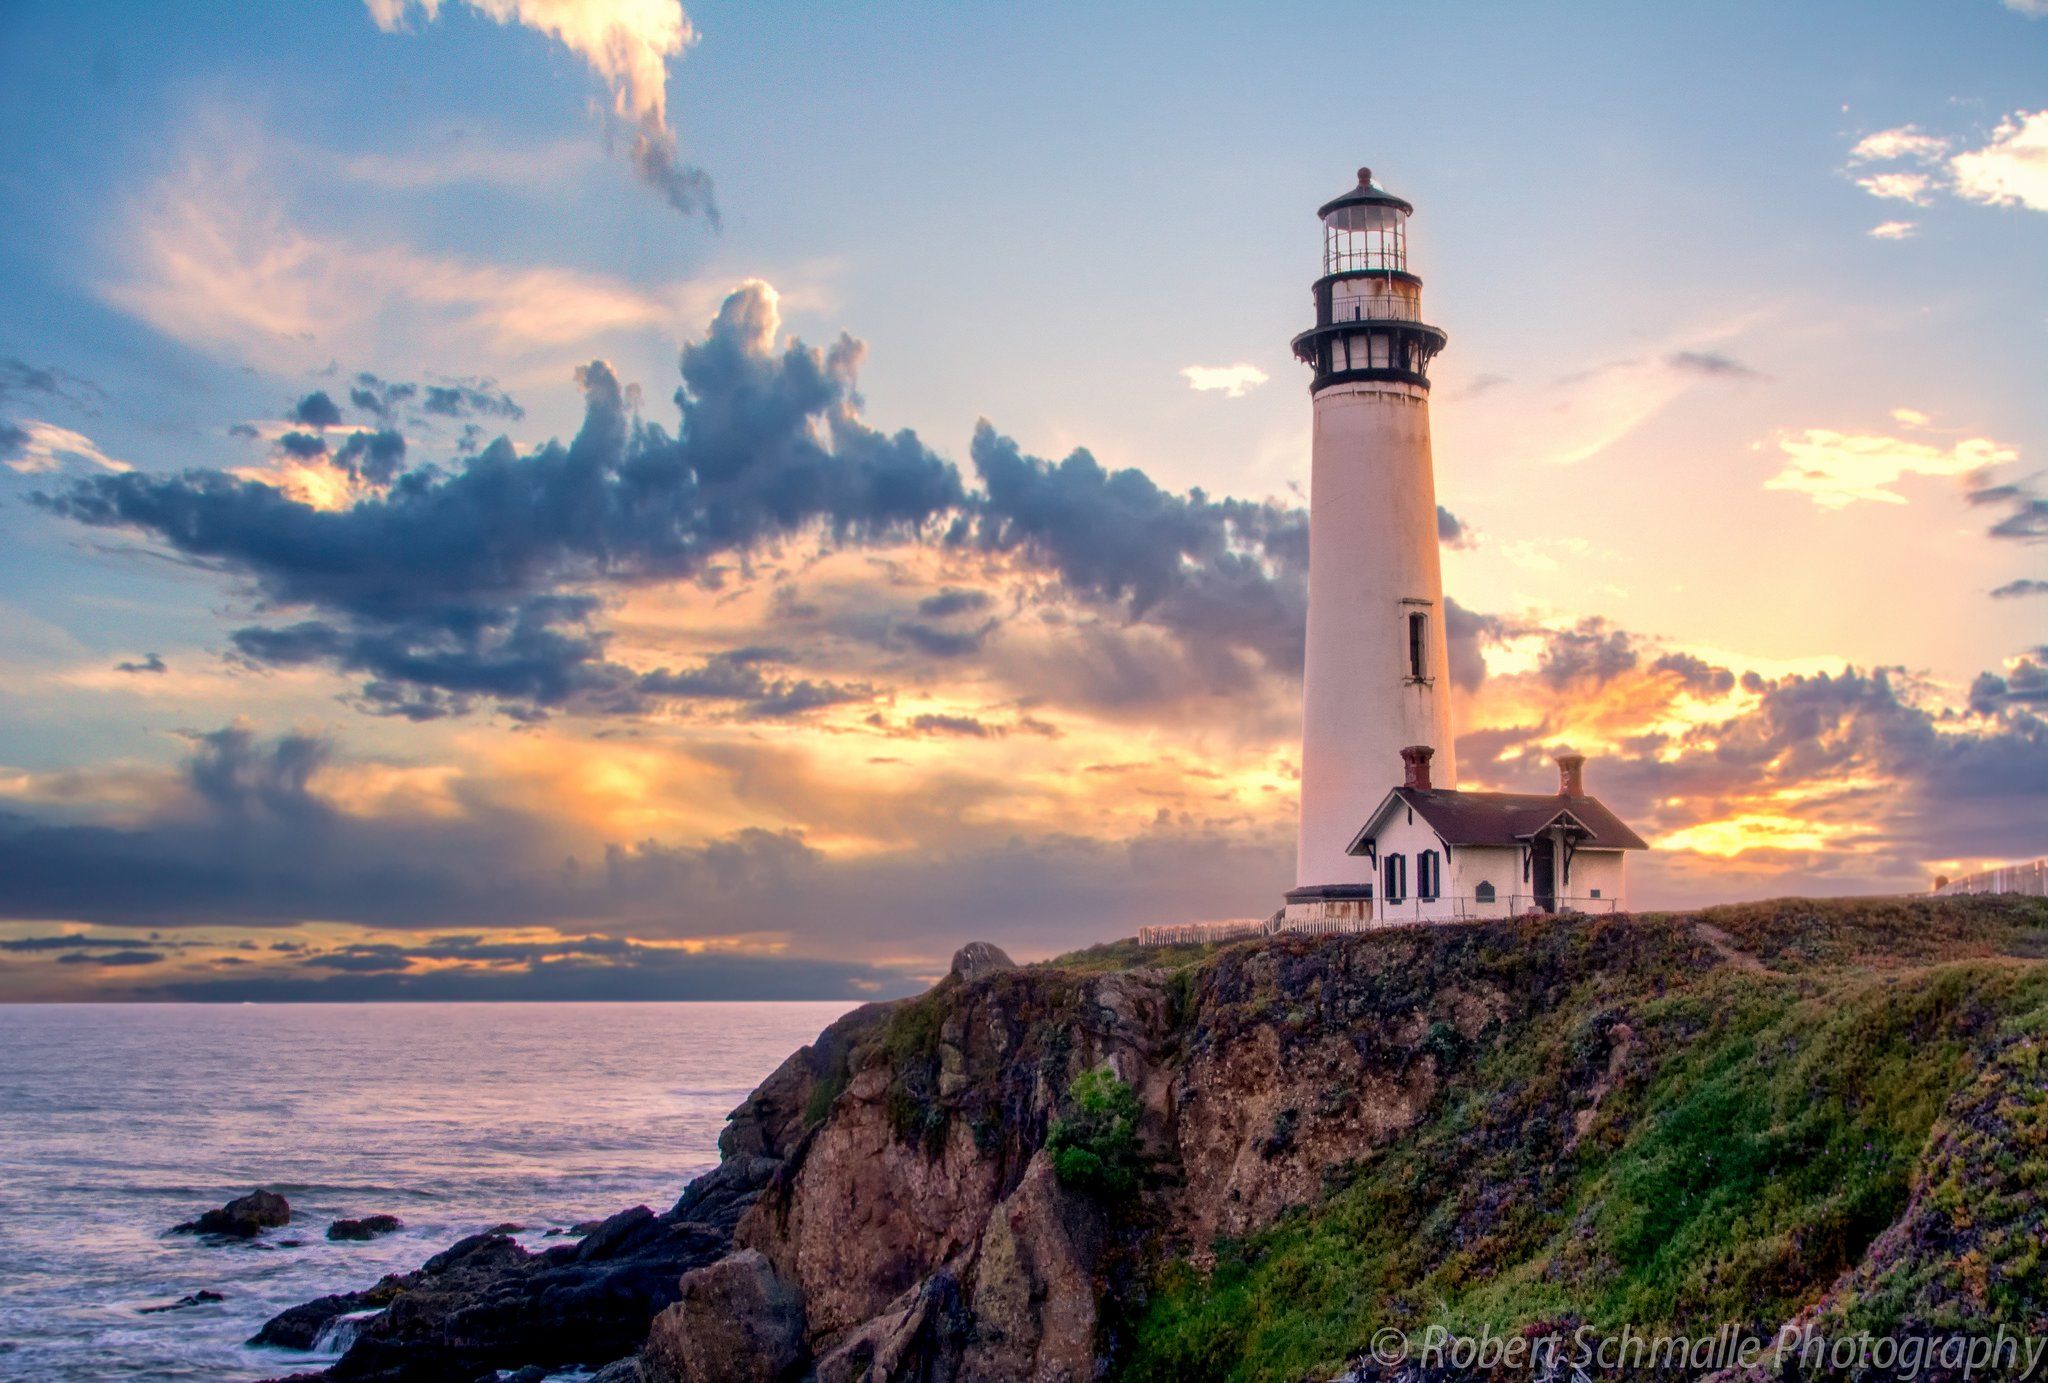 Desktop wallpaper with lighthouse and house there. by WallpaperEarth on  DeviantArt